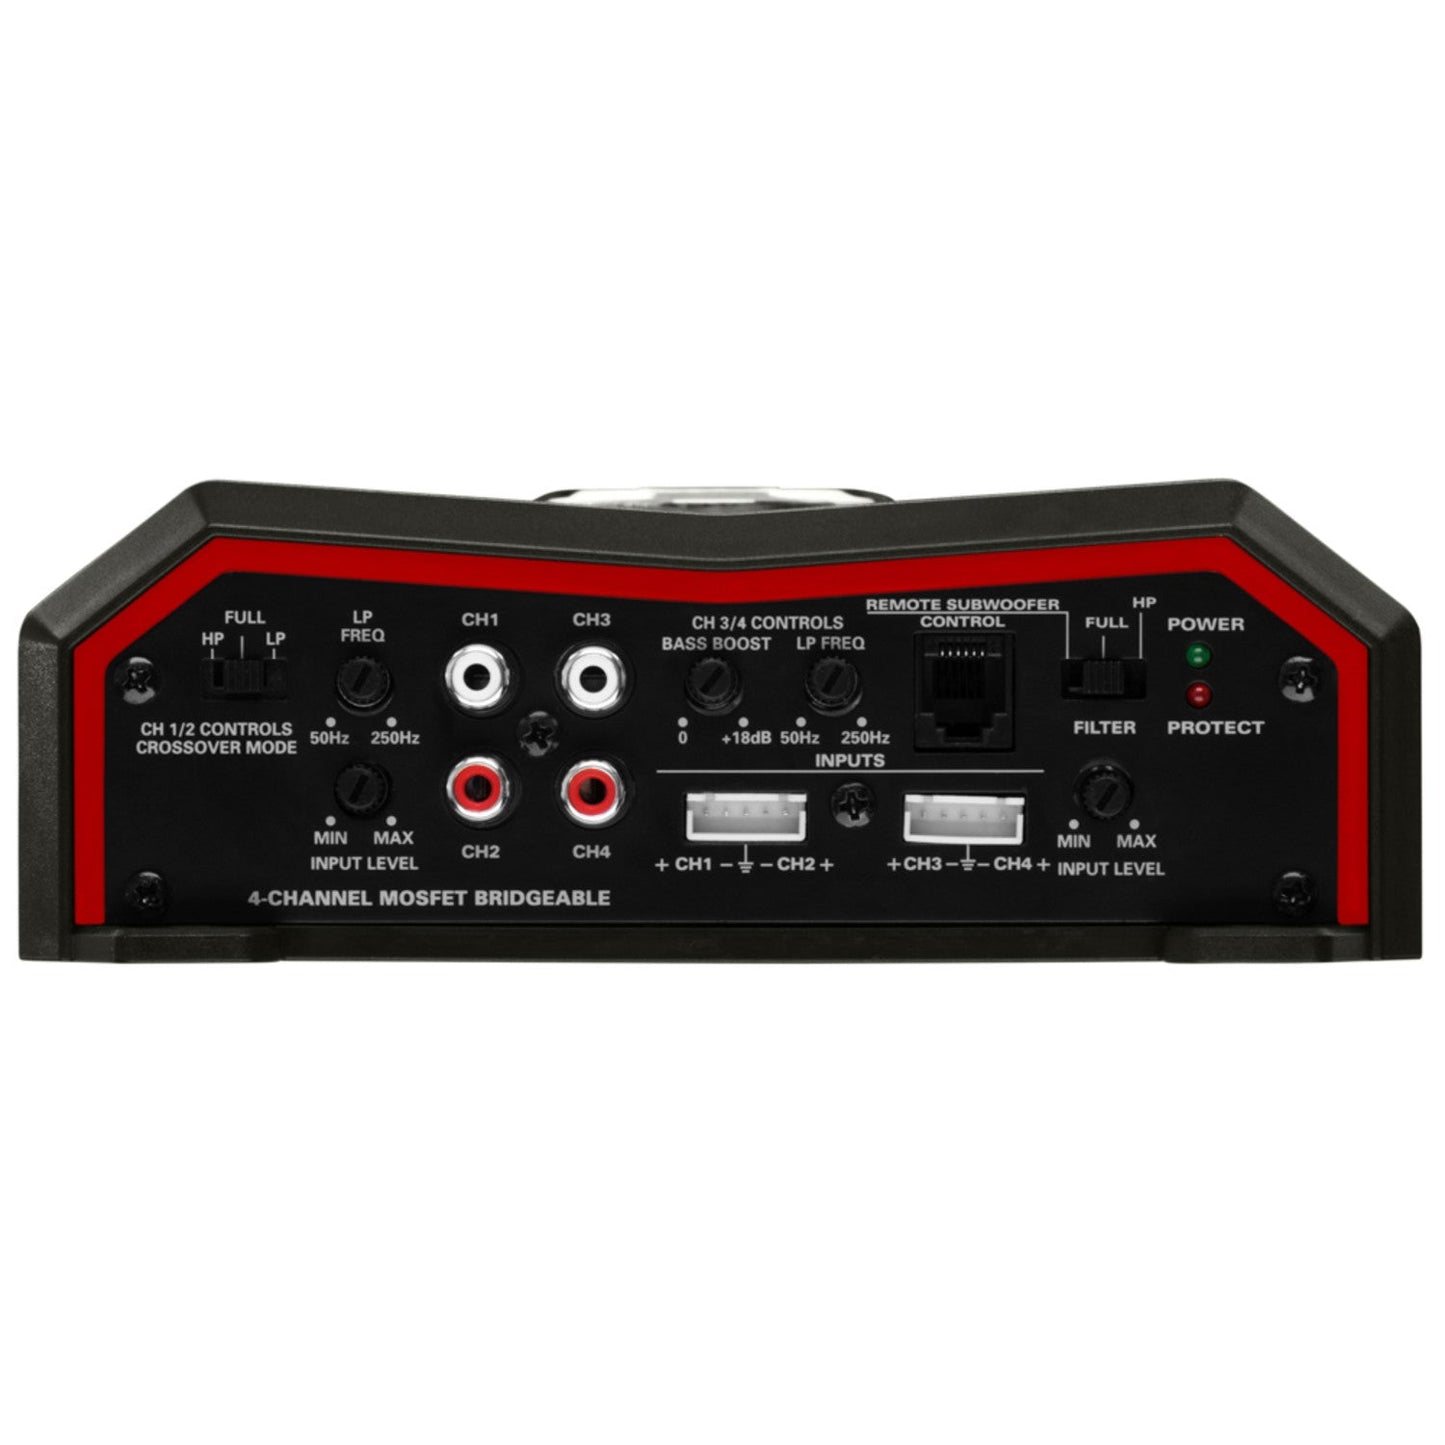 BOSS Audio Systems, Amplifiers > 4-Channel, Model BE1600.4, right side view